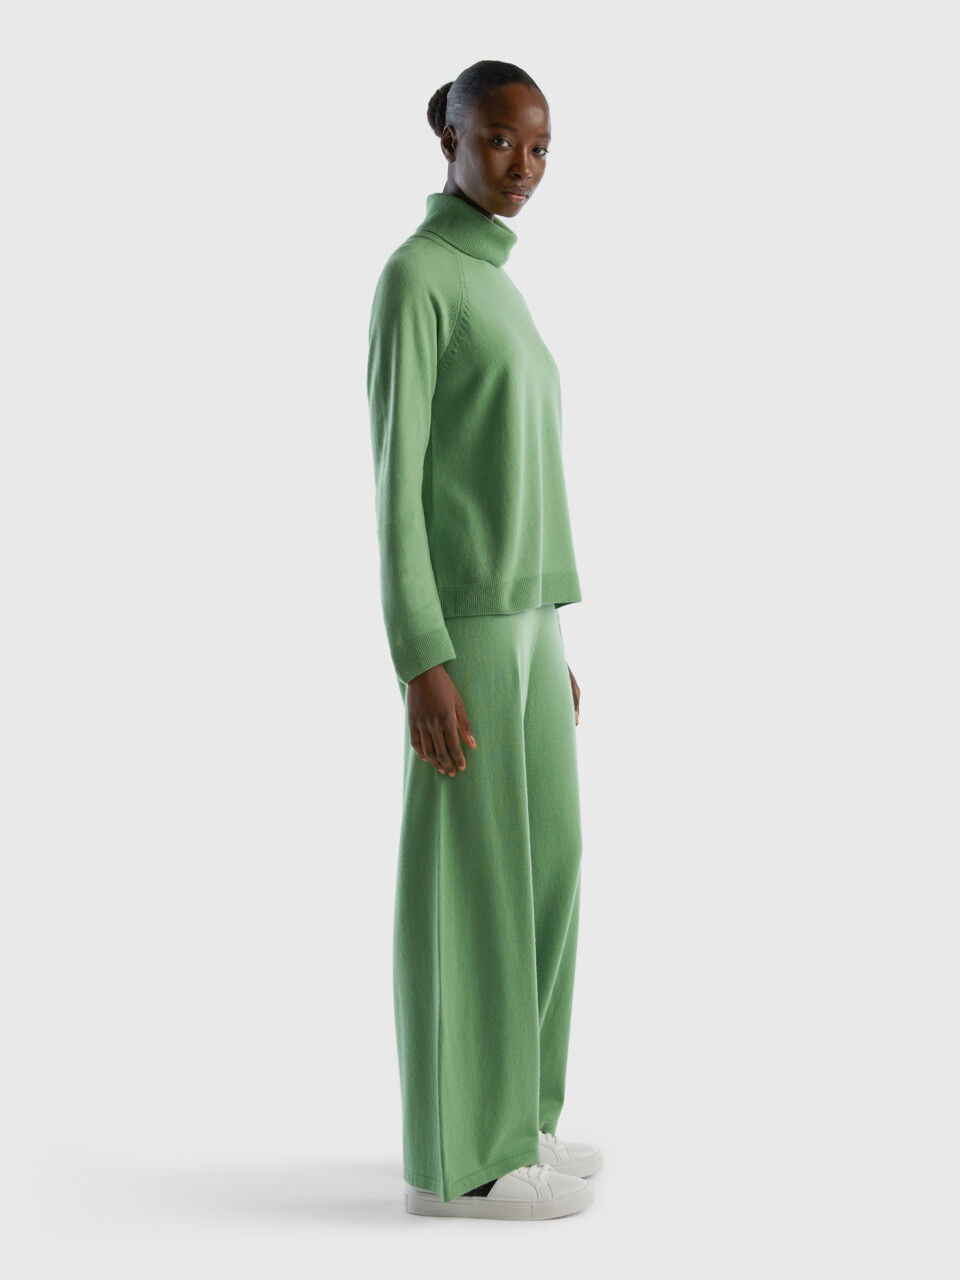 Sage green trousers in wool and cashmere blend